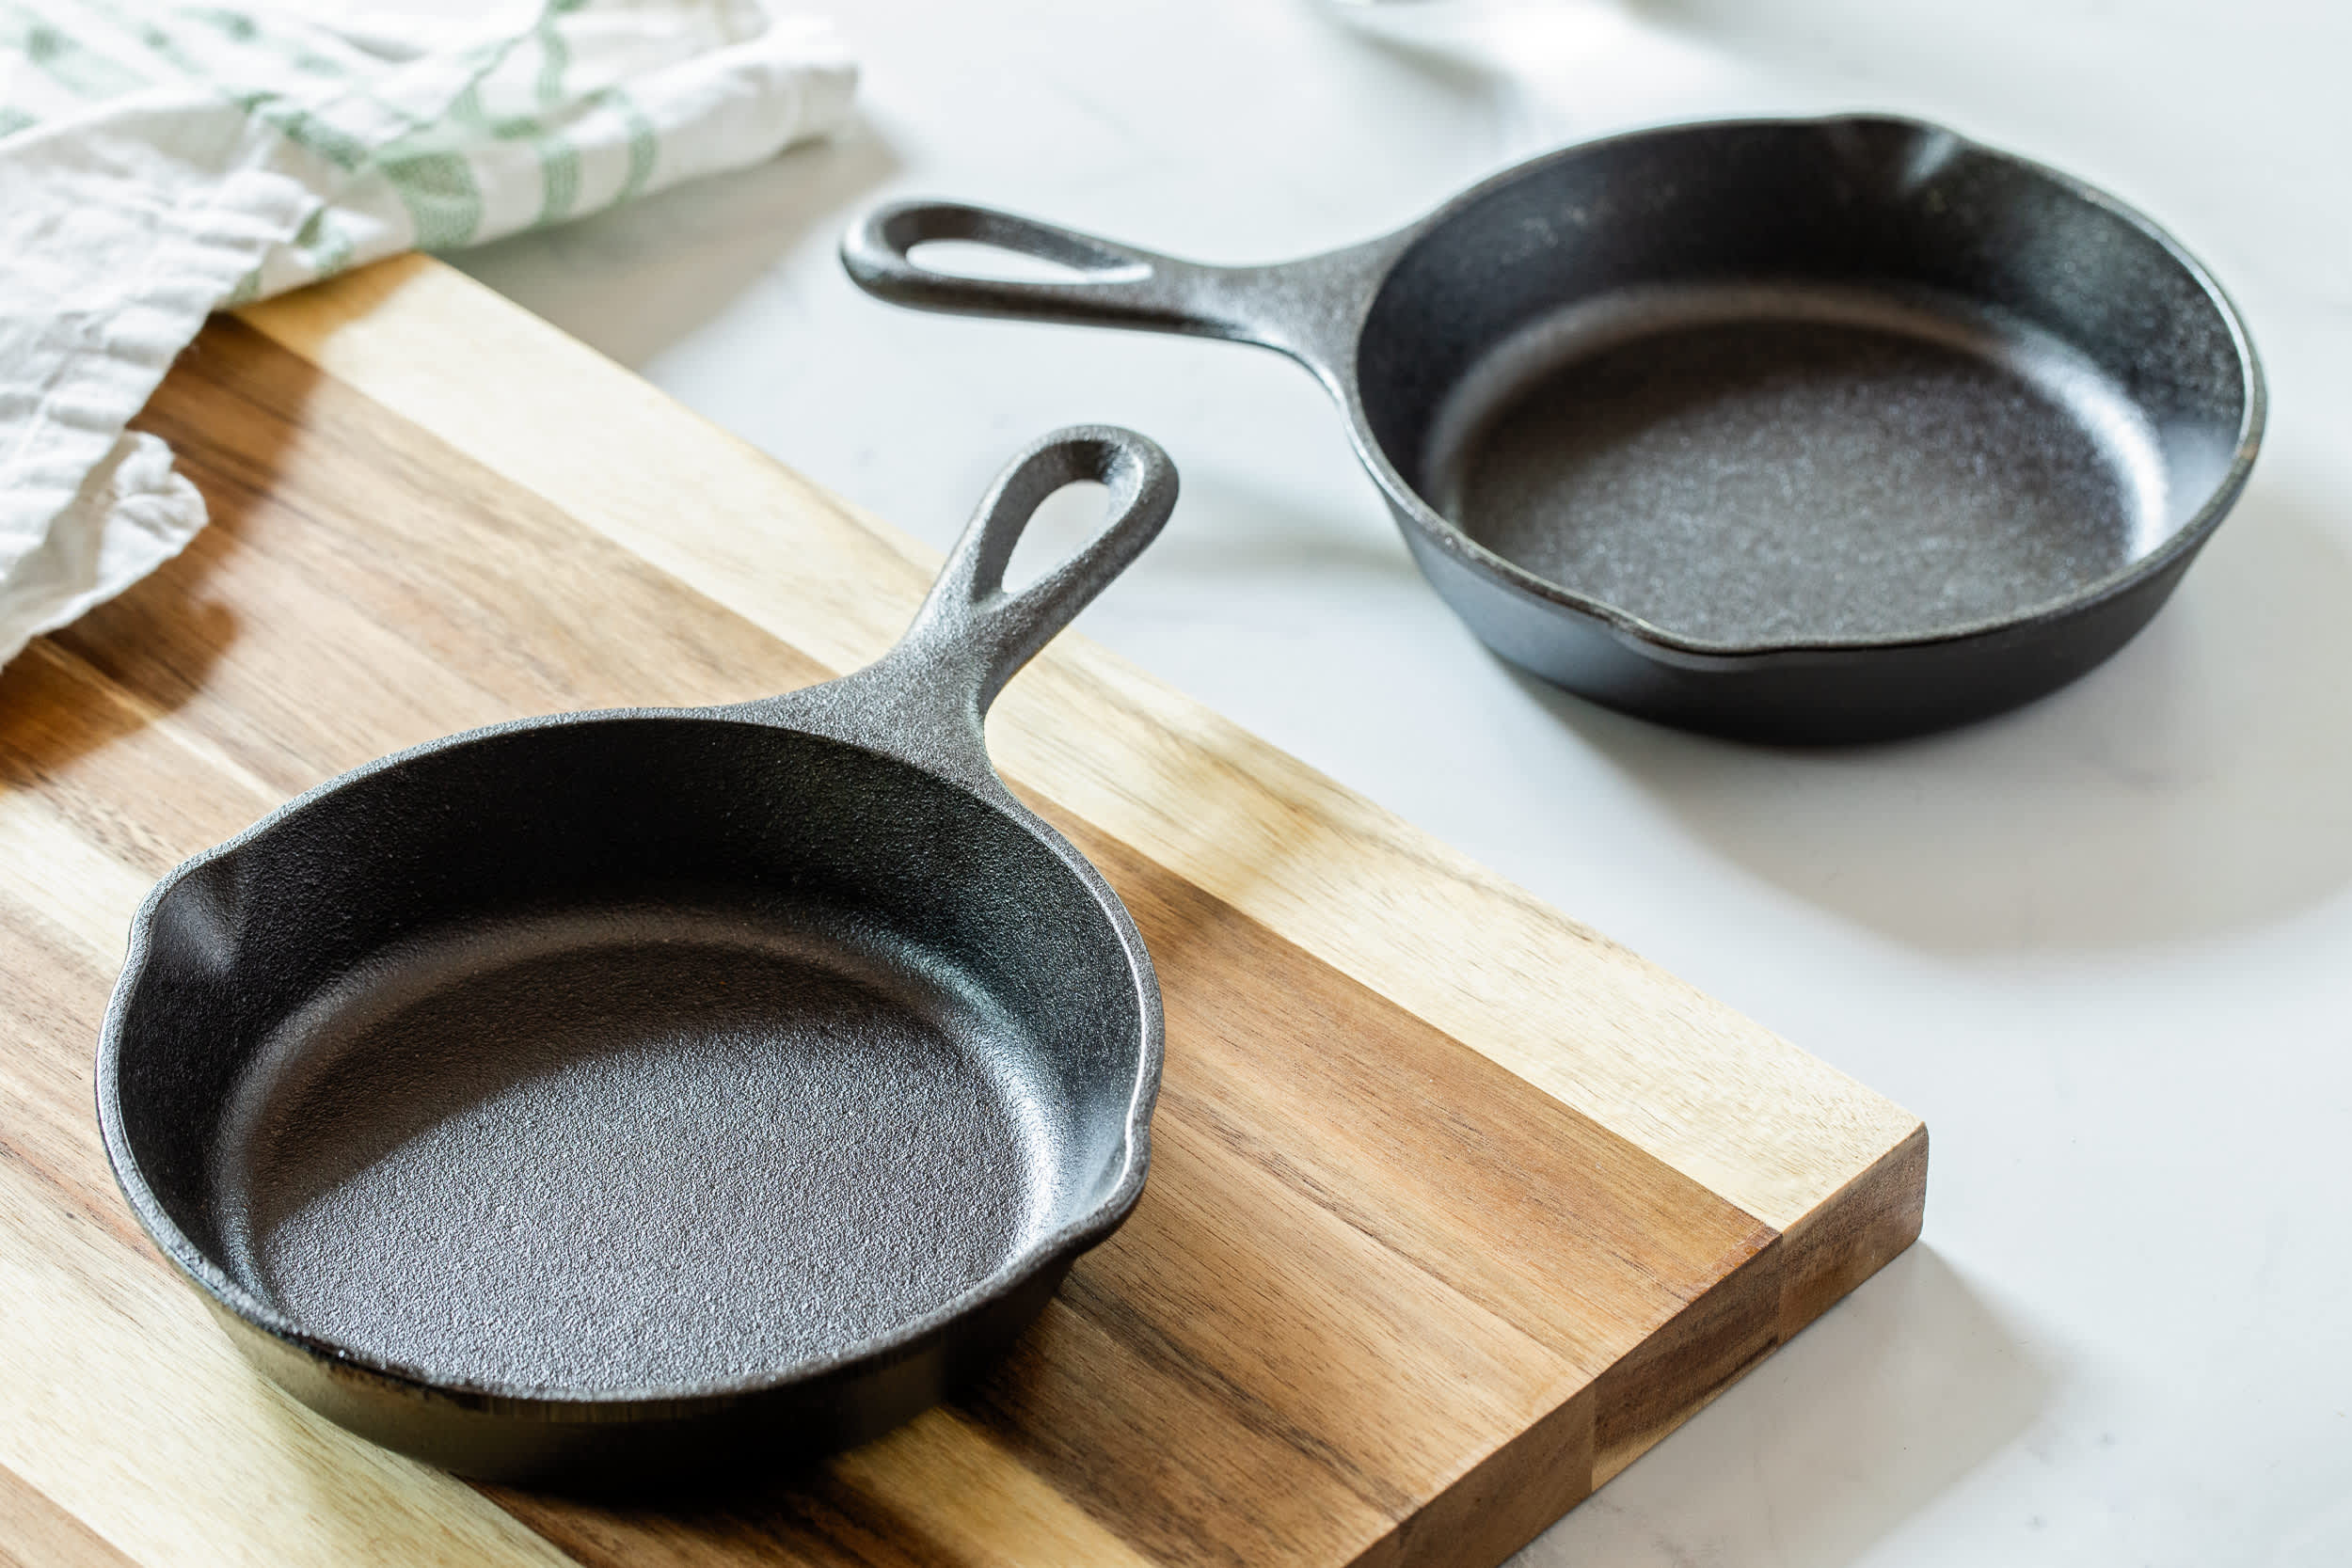 https://cdn.apartmenttherapy.info/image/upload/v1625763509/k/Photo/Lifestyle/2021-07-These-Mini-Cast-Iron-Skillets-Are-Made-for-Summer-y-Desserts%20/kitchn-2021-mini-cast-iron-skillet-1.jpg